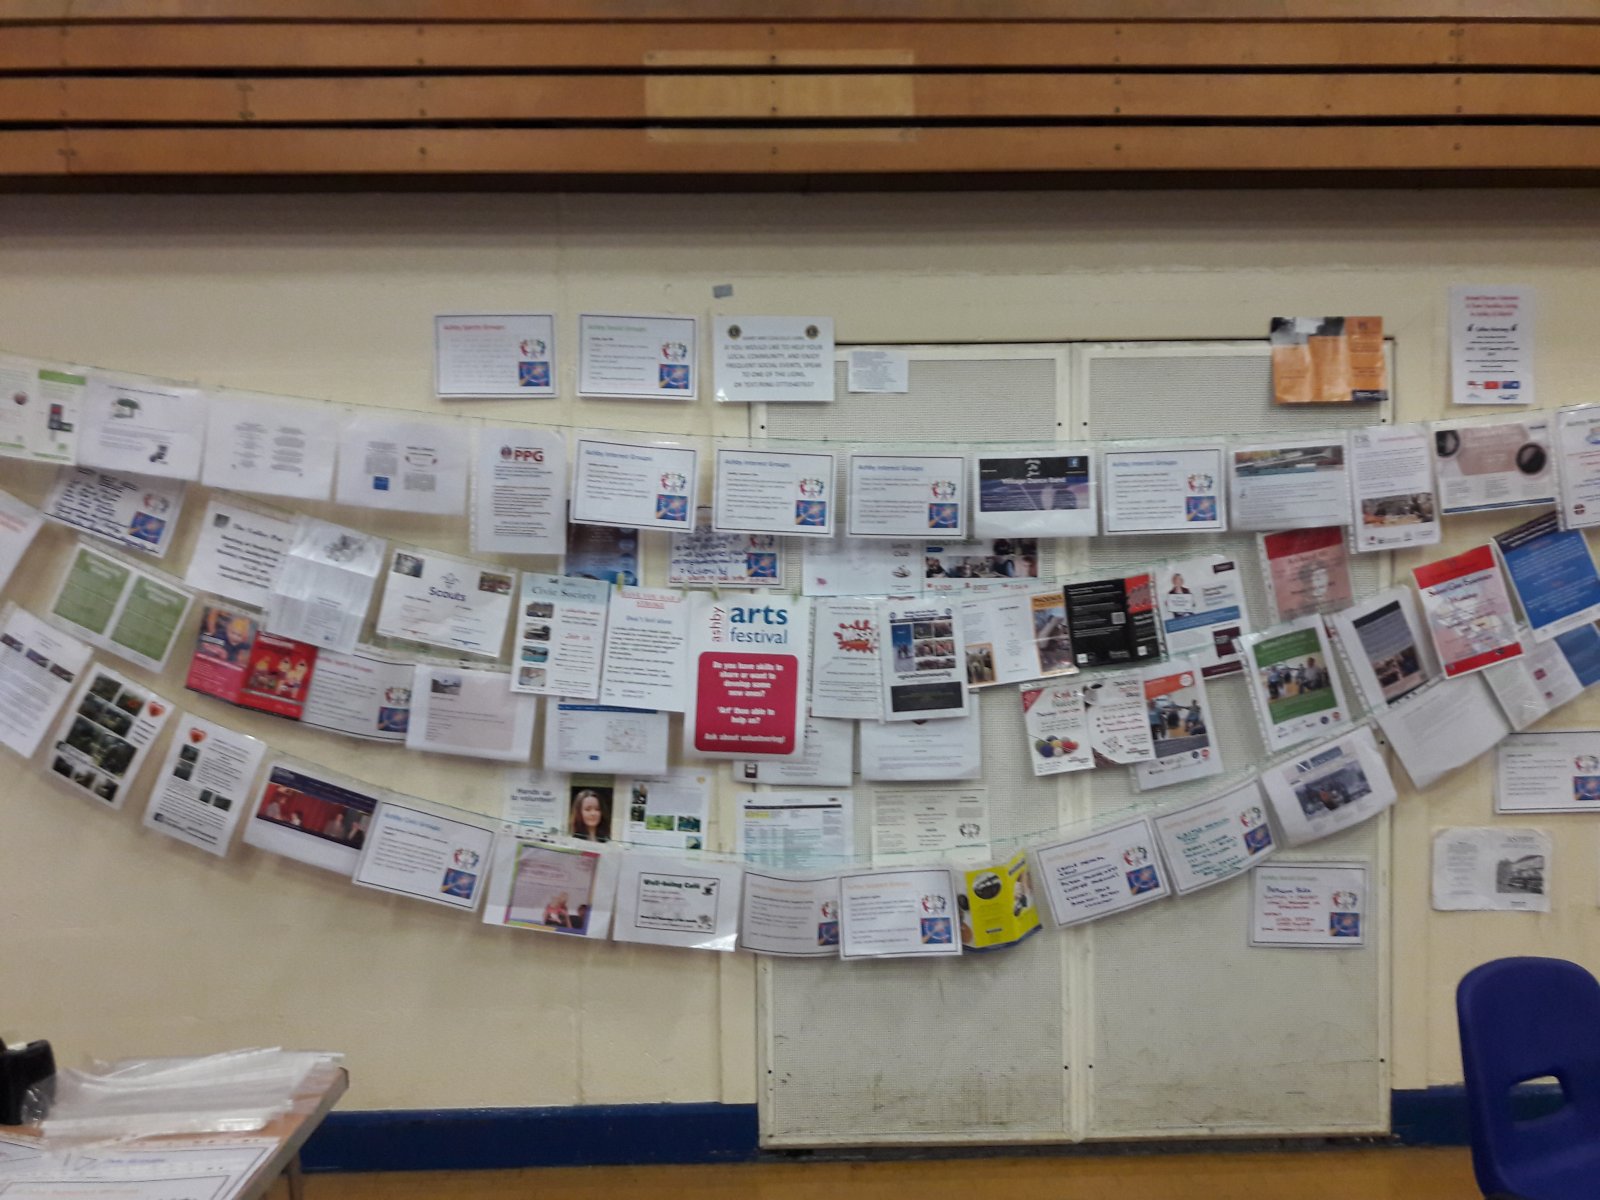 Ashby Community Roadshow 'Wall of Fame' with details of Local Groups and Activities